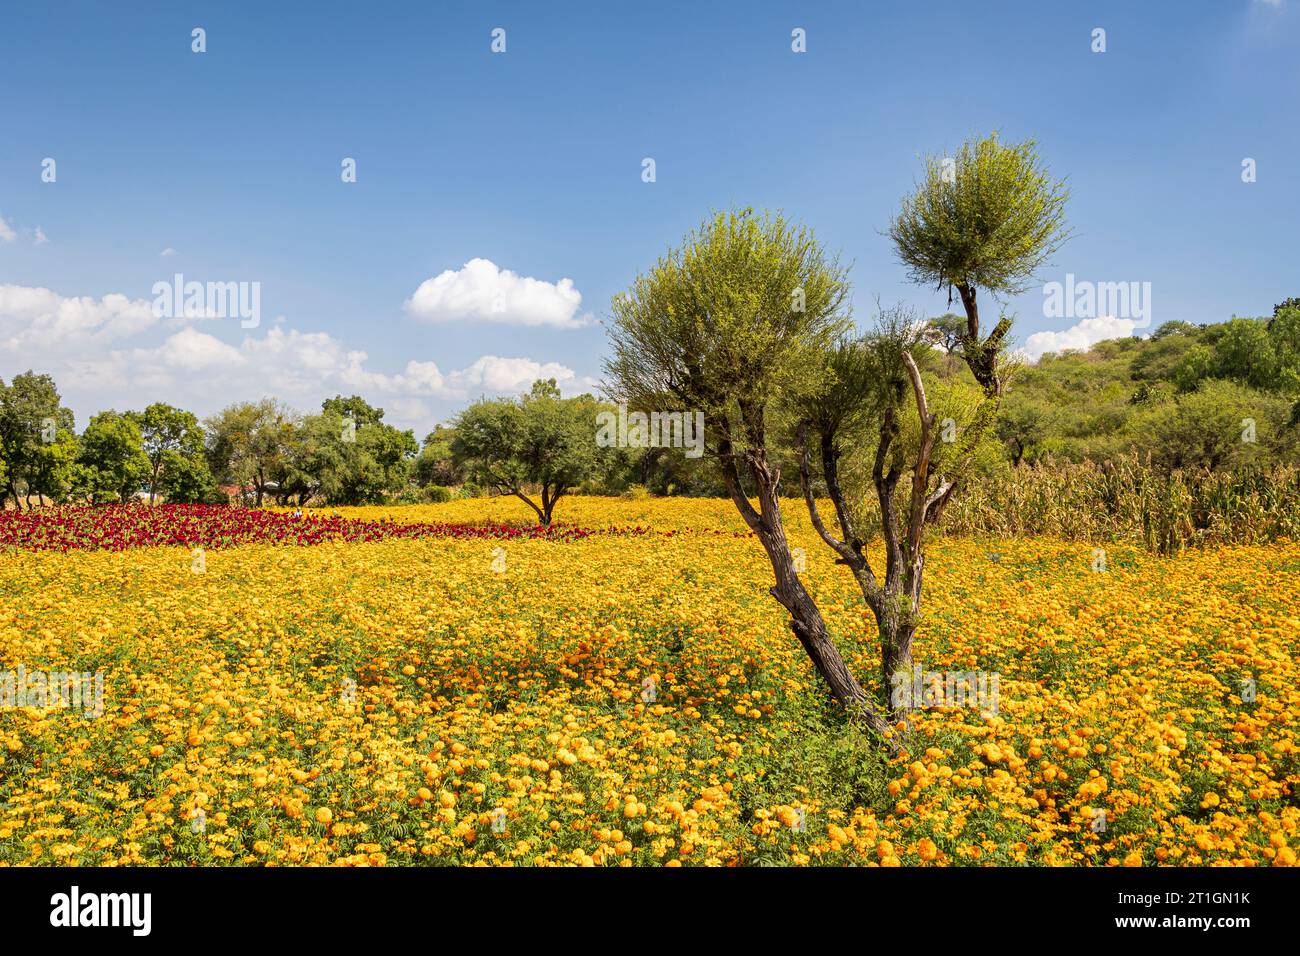 Field of marigolds, soon to be harvested for the Day of the Dead festivities, near Copandaro, Michoacan, Mexico. Stock Photo